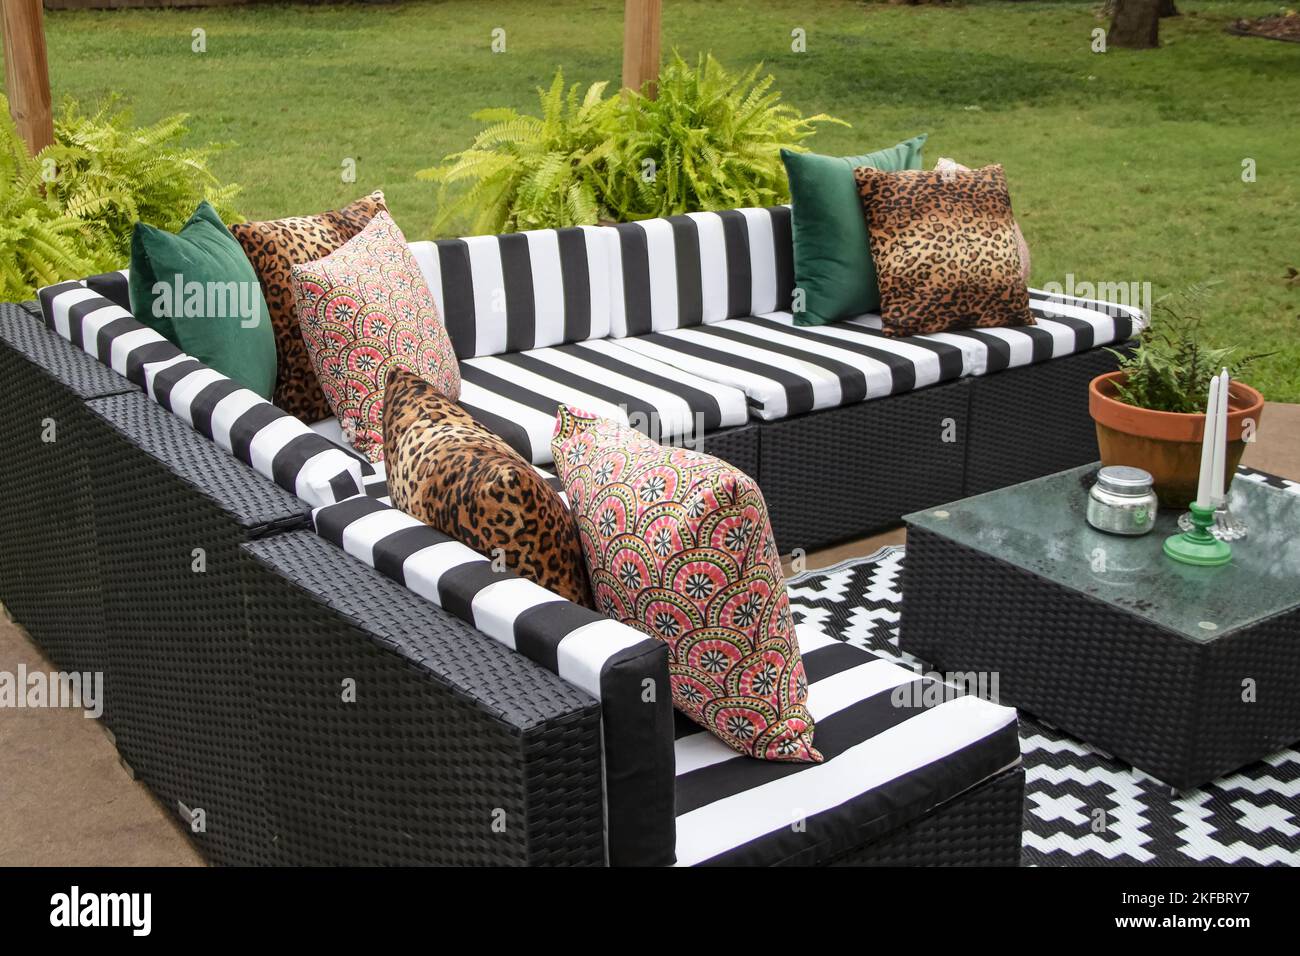 Outdoor lawn furniture with black and white crisply striped upholstery and assorted pillows grouped around a table with ferns on a patio in yard with Stock Photo